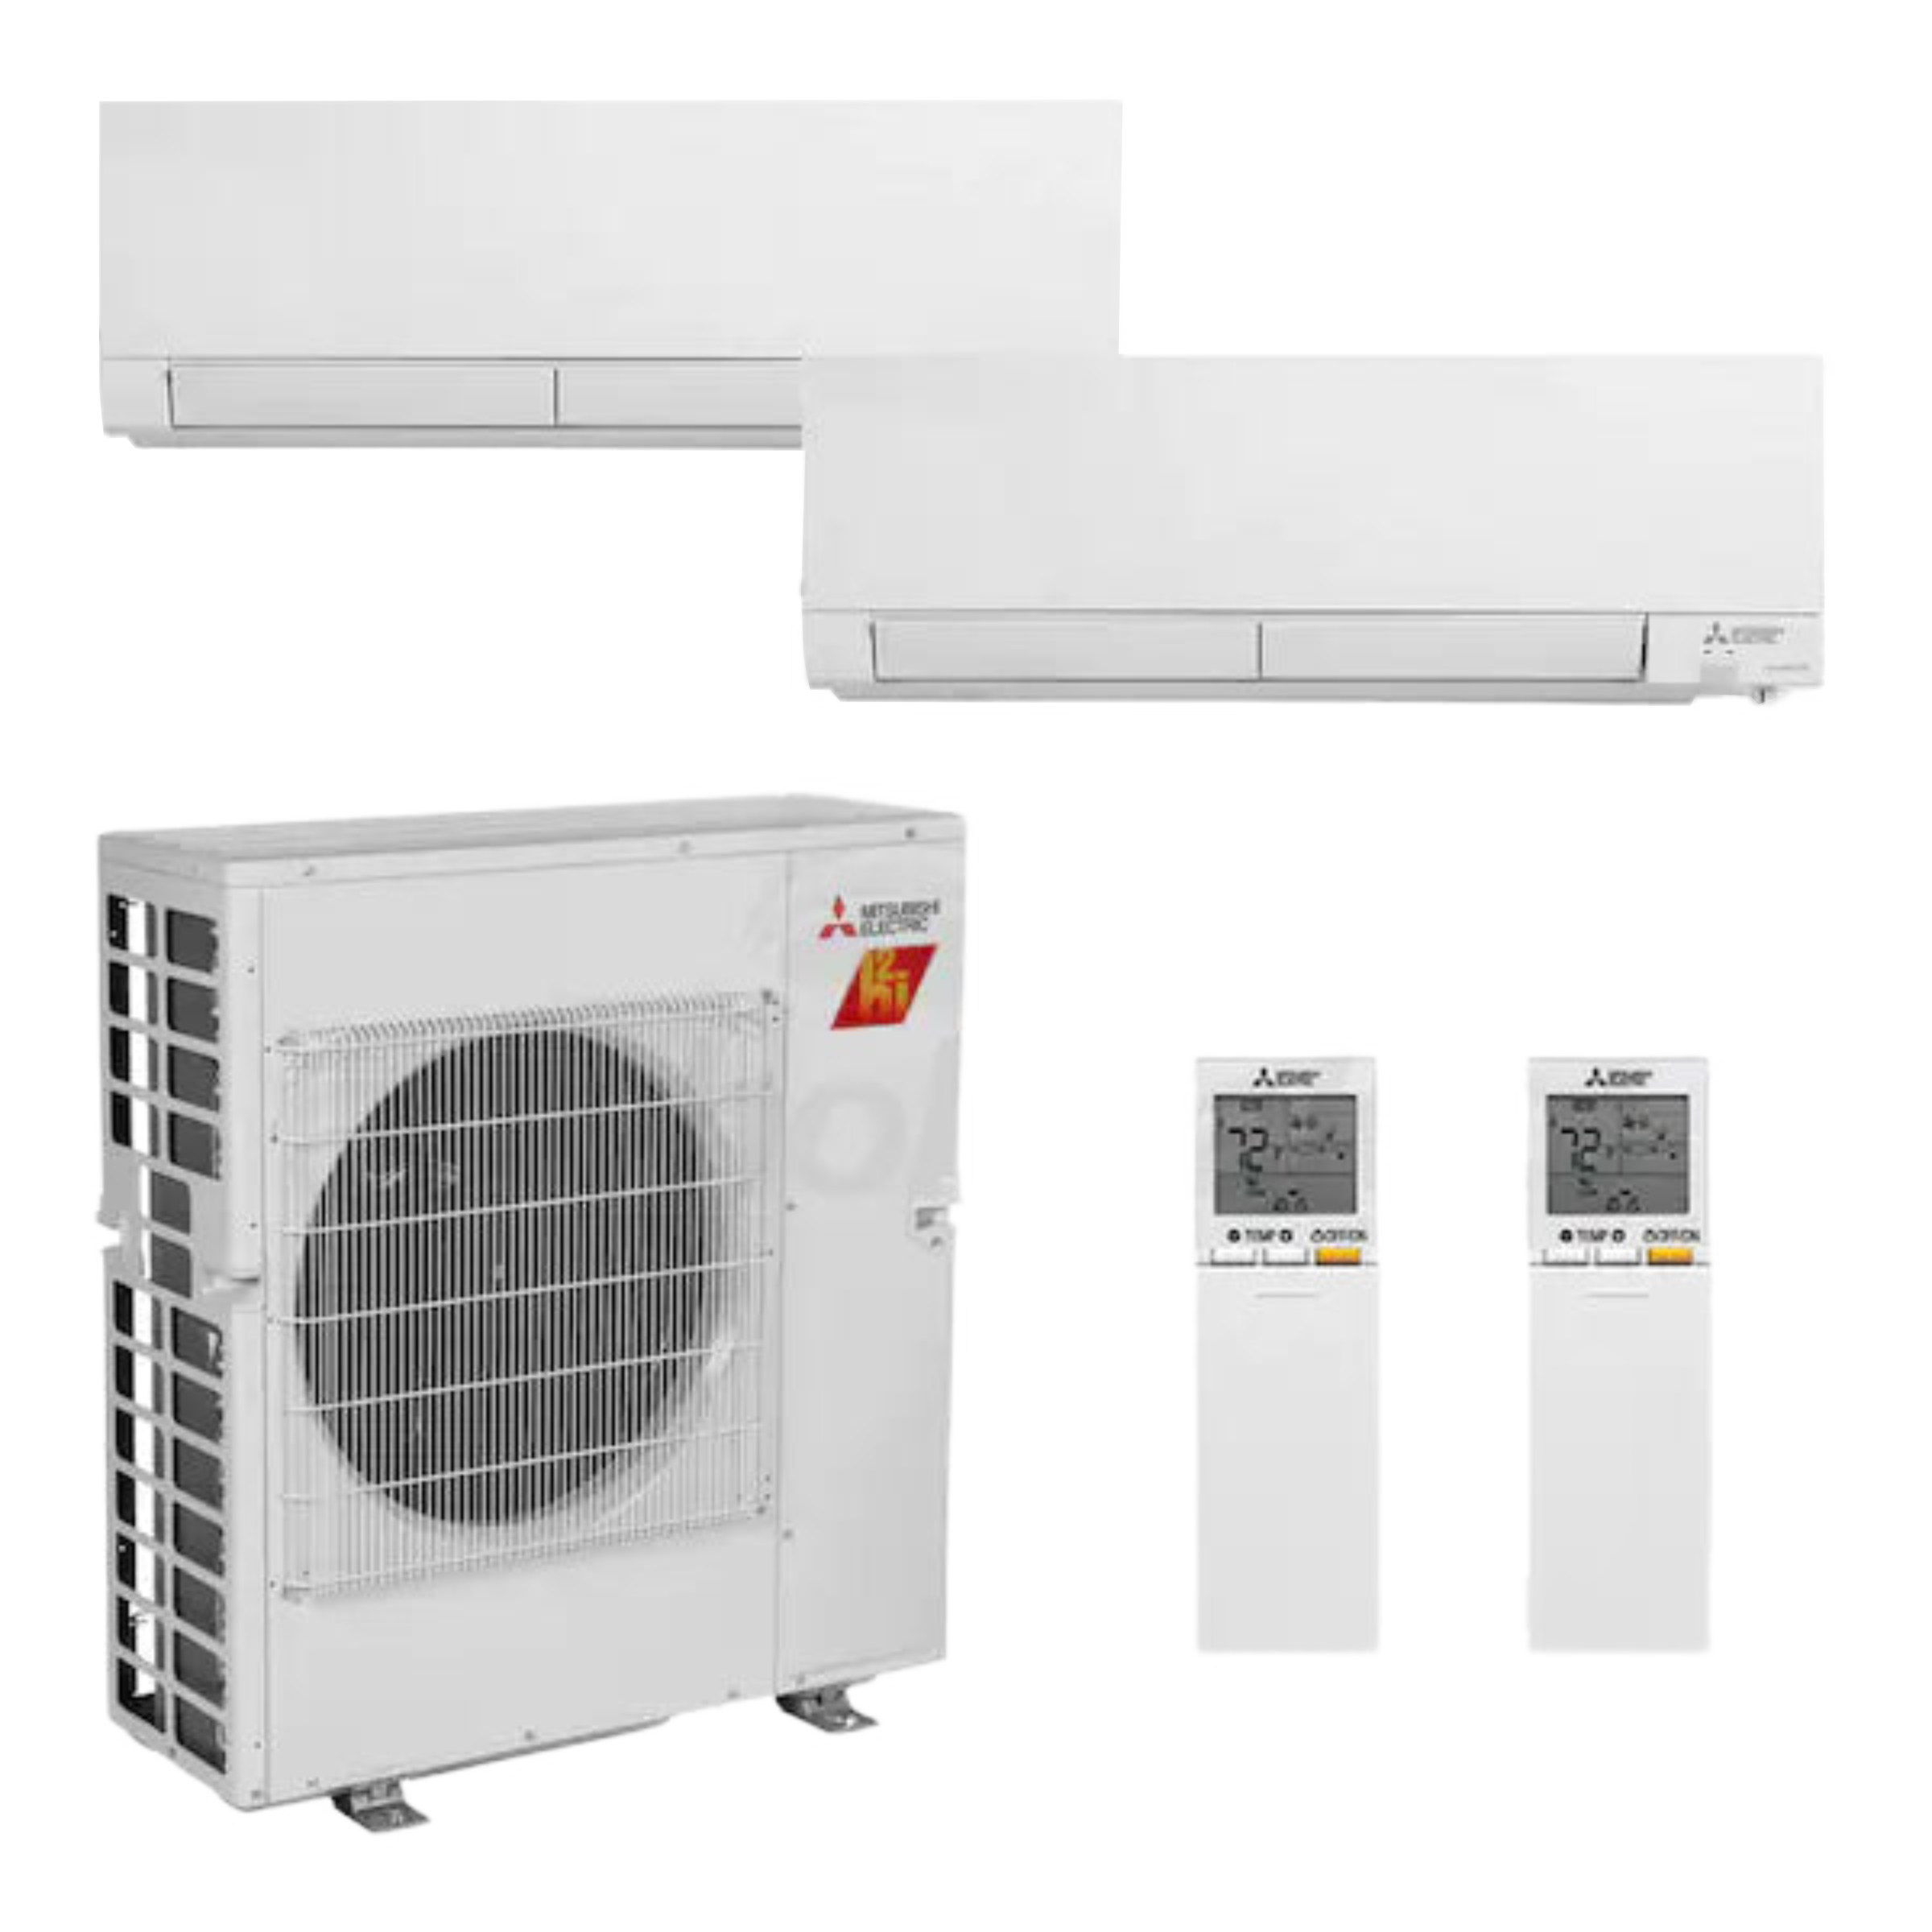 Mitsubishi 2-Zone 17 SEER Mini Split Ductless Heat pump Air Conditioner Model MXZ-2C20NAHZ2 22000 BTU for Outdoor Unit with 2 Indoor units, R-410A